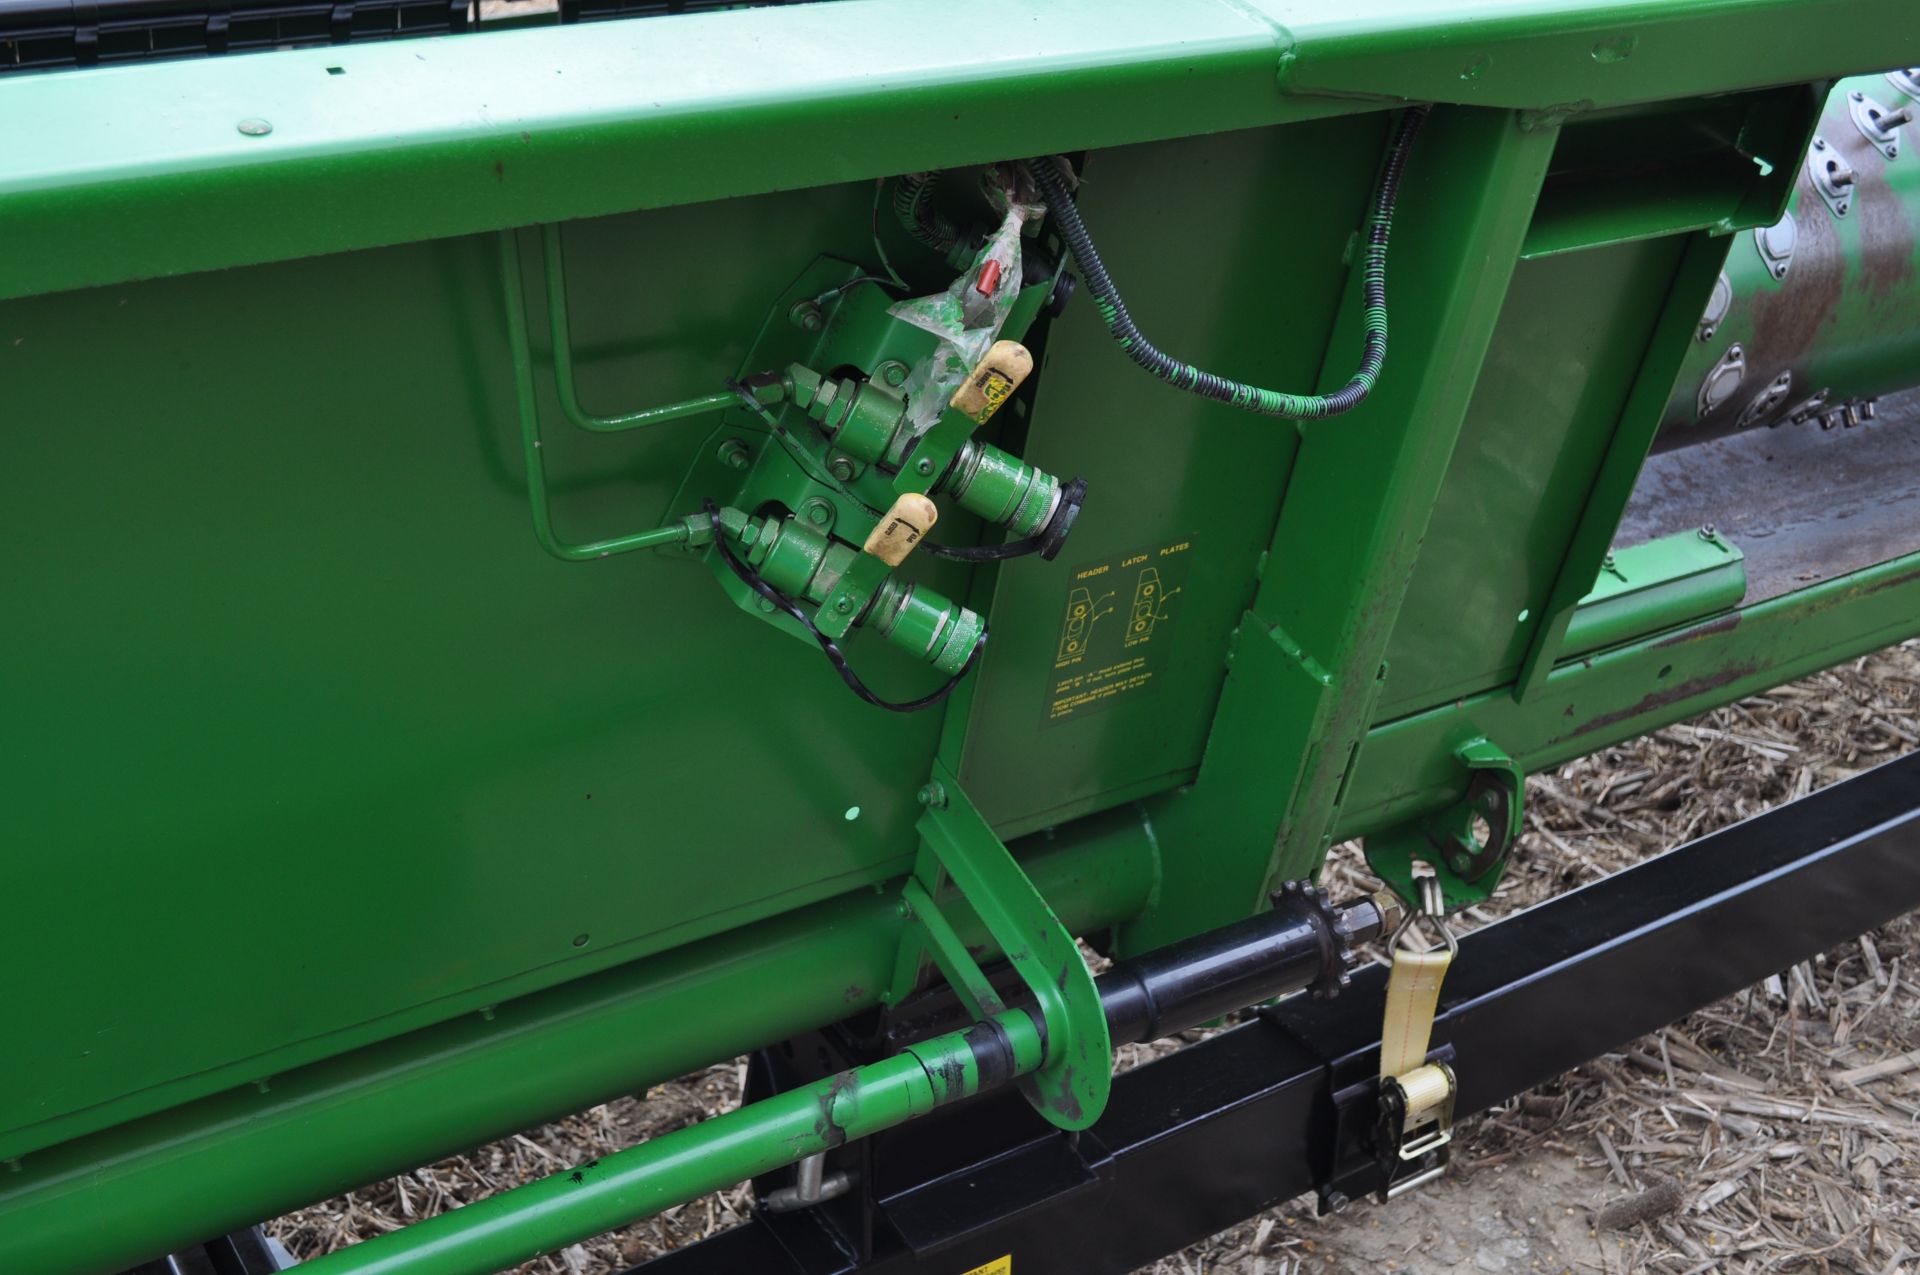 18’ John Deere 918 grain head, hyd fore/aft, row crop dividers, poly skid shoes, SN H00918F670831 - Image 9 of 10